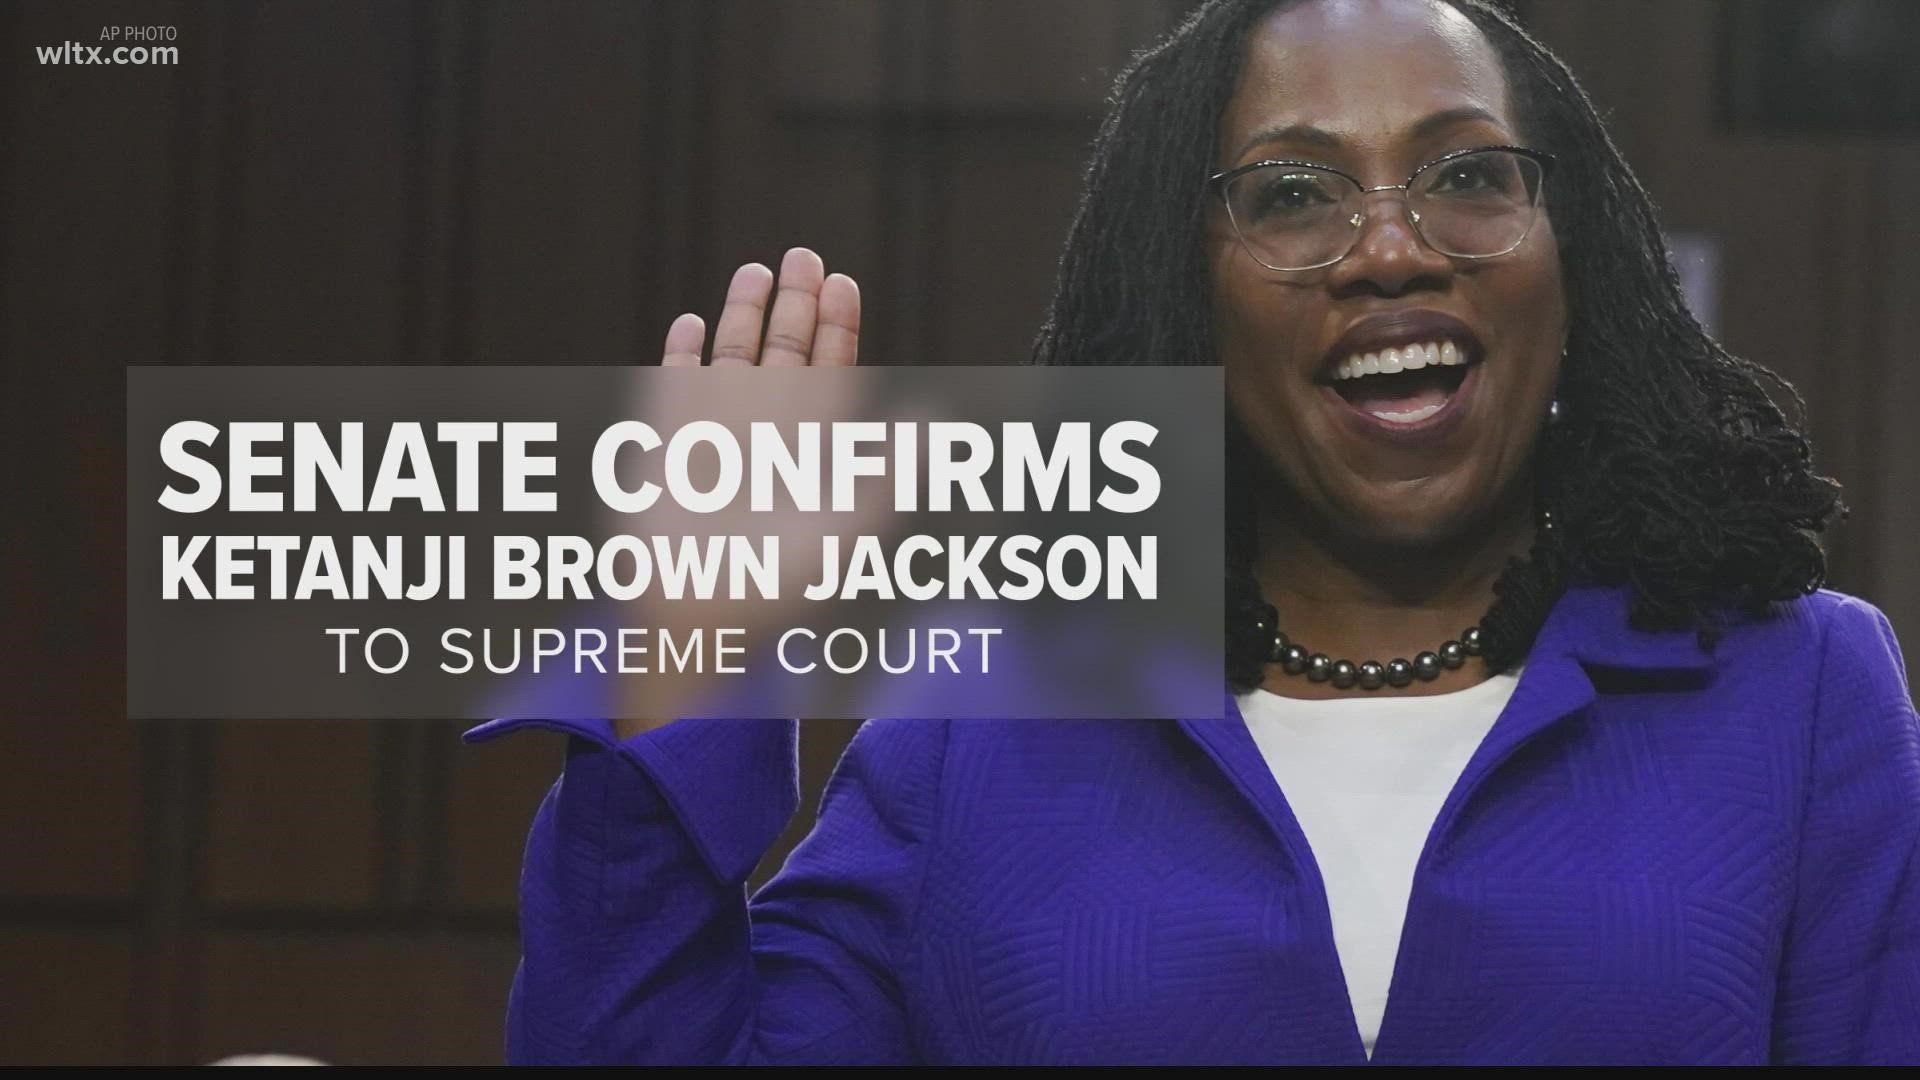 The Senate confirmed Ketanji Brown Jackson to the Supreme Court on Thursday, shattering a historic barrier by securing her place as the first Black female justice.